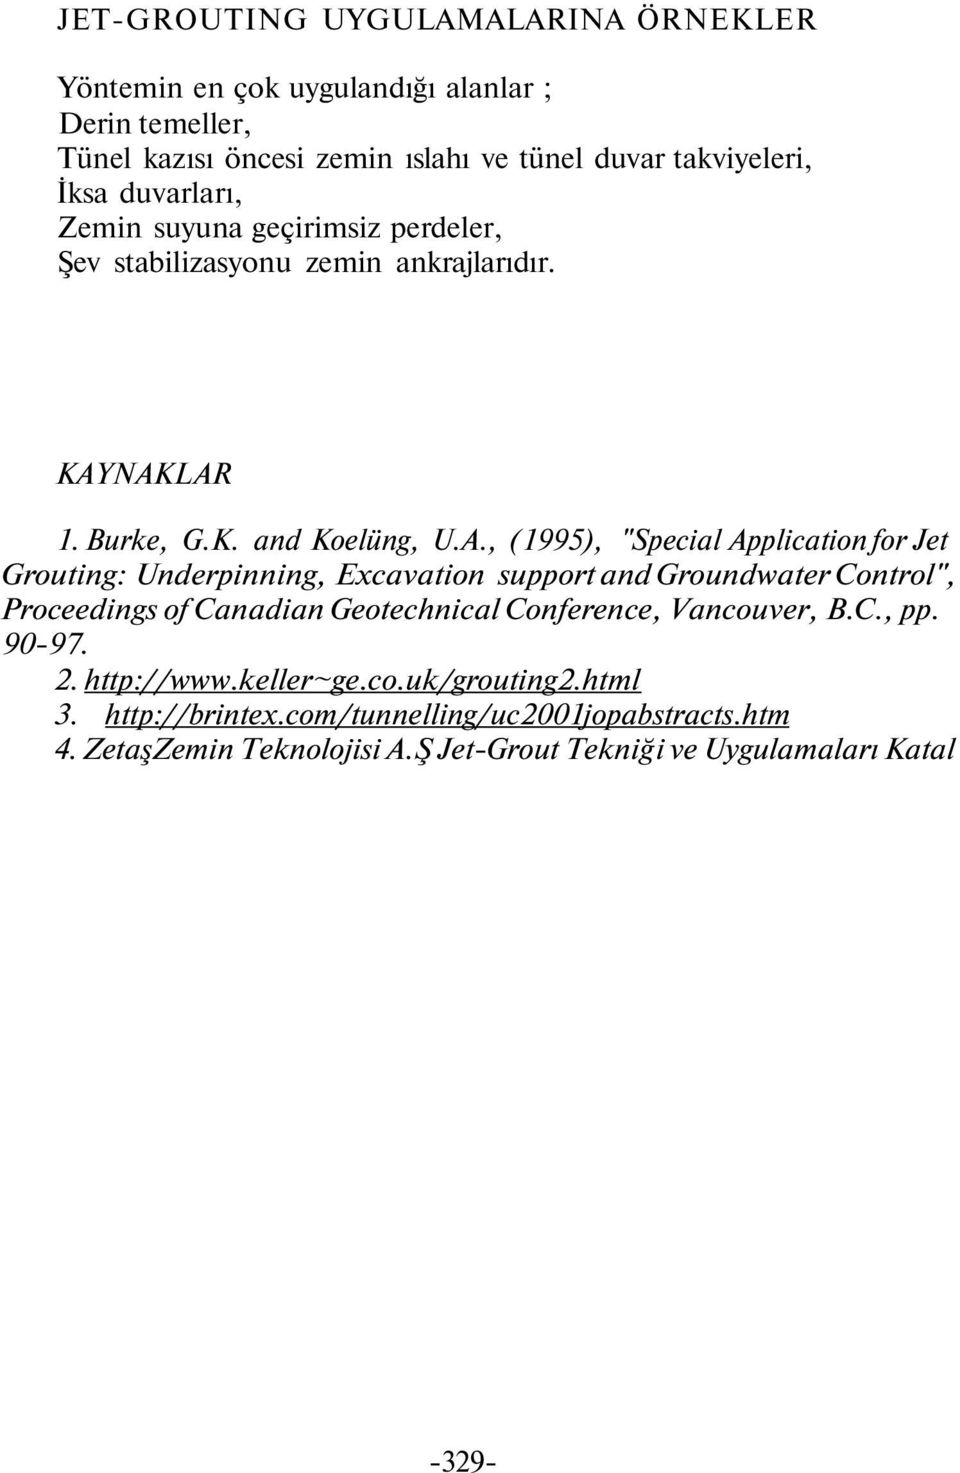 NAKLAR 1. Burke, G.K. and Koelüng, U.A., (1995), "Special Application for Jet Grouting: Underpinning, Excavation support and Groundwater Control", Proceedings of